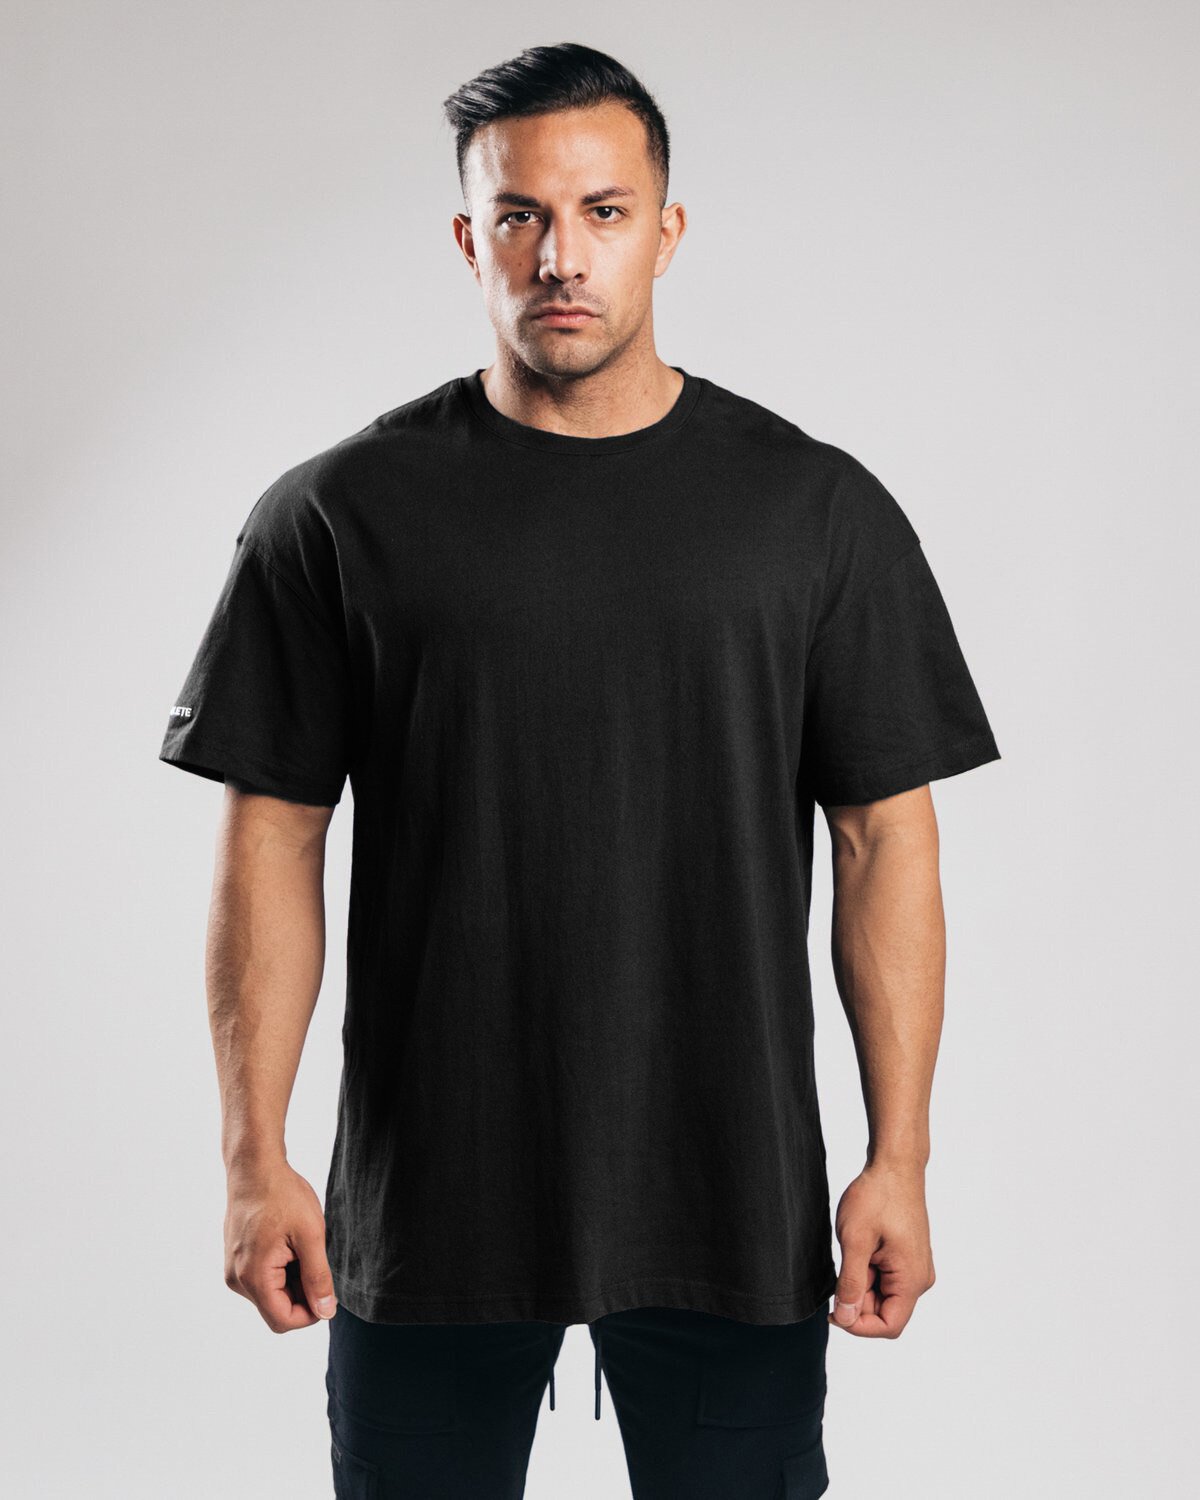 Loose Casual Sporting T-shirt Gym Sports Clothing Black